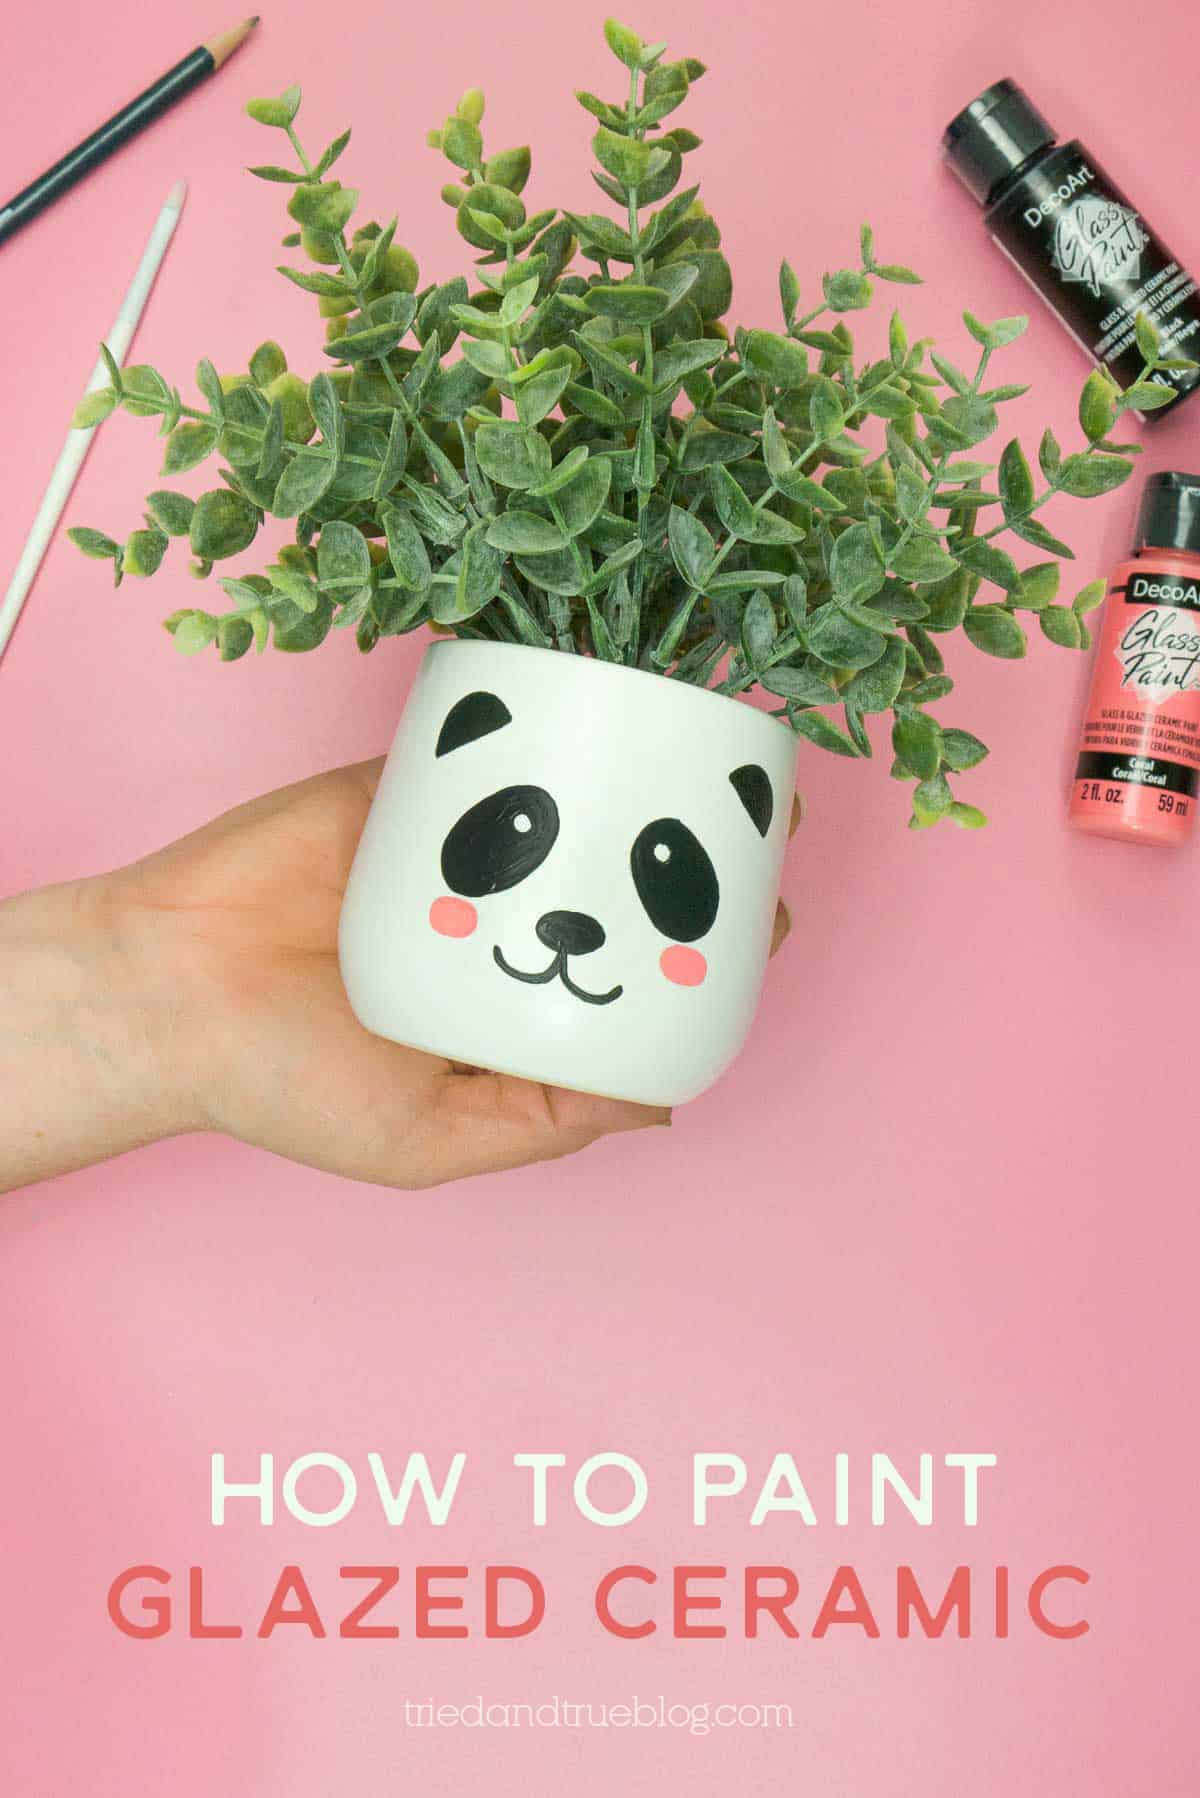 Hand holding white planter with painted panda face. Words include 